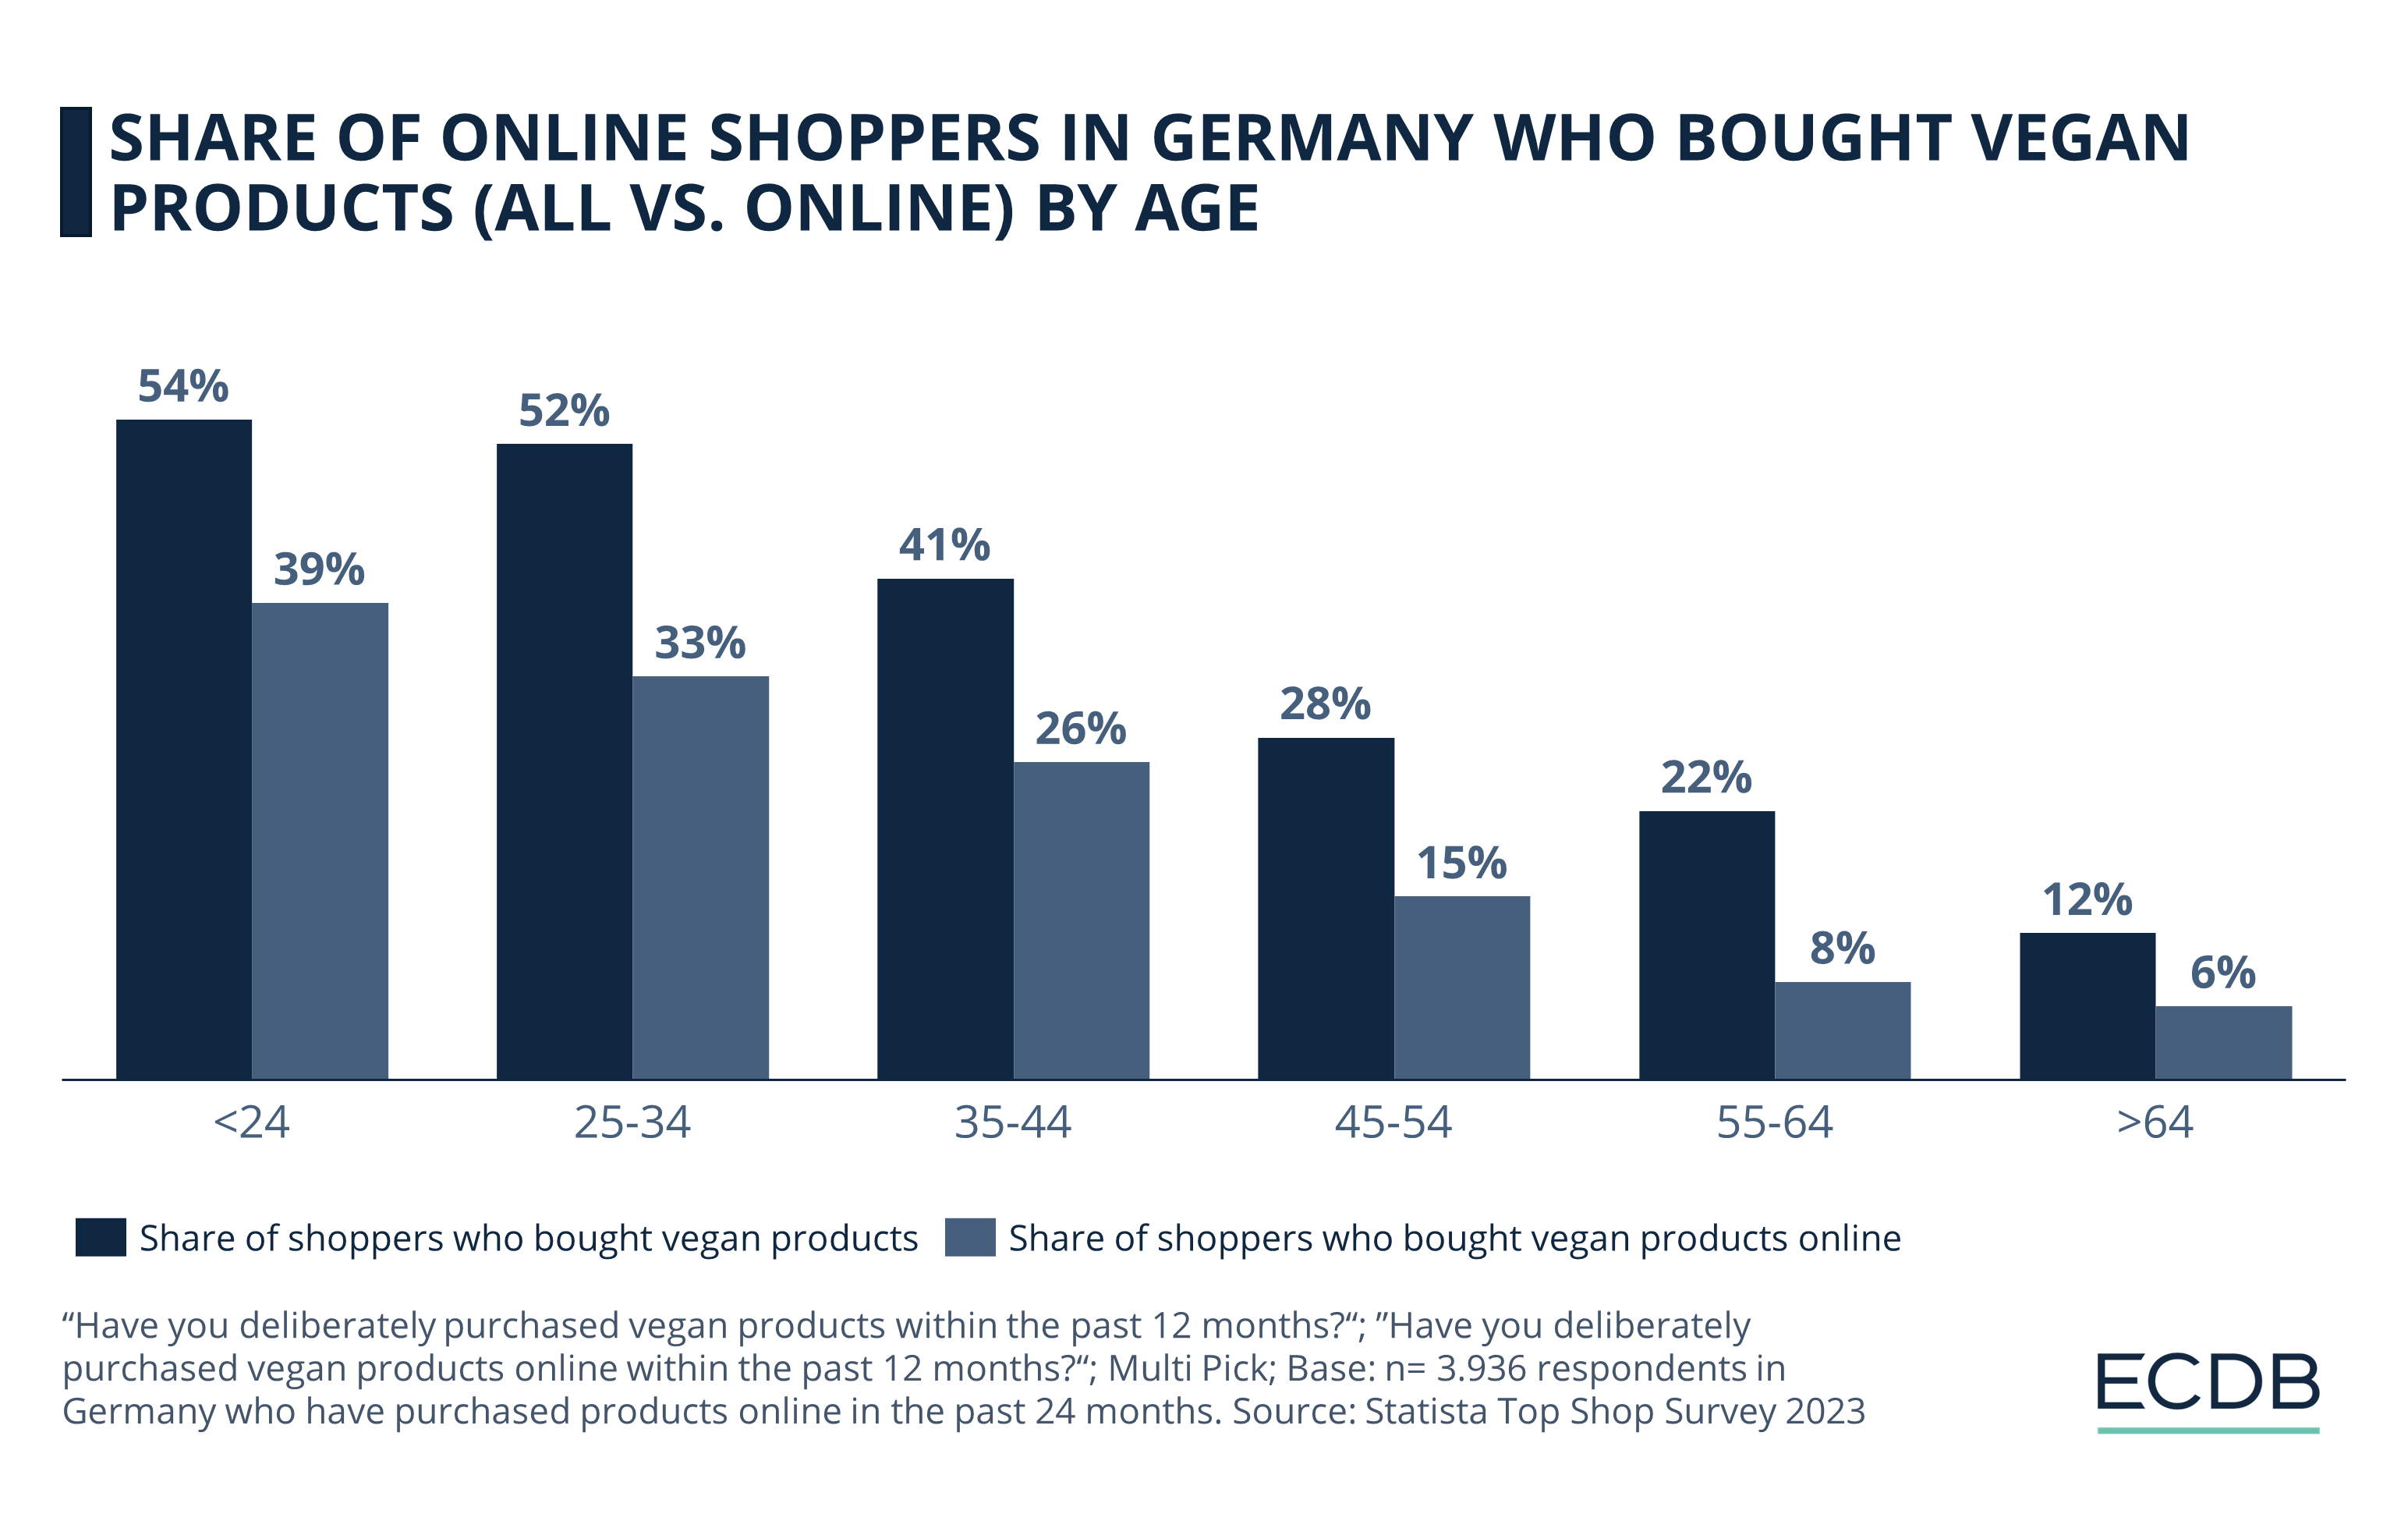 Share of Online Shoppers in Germany Who Bought Vegan Products (All vs. Online) by Age